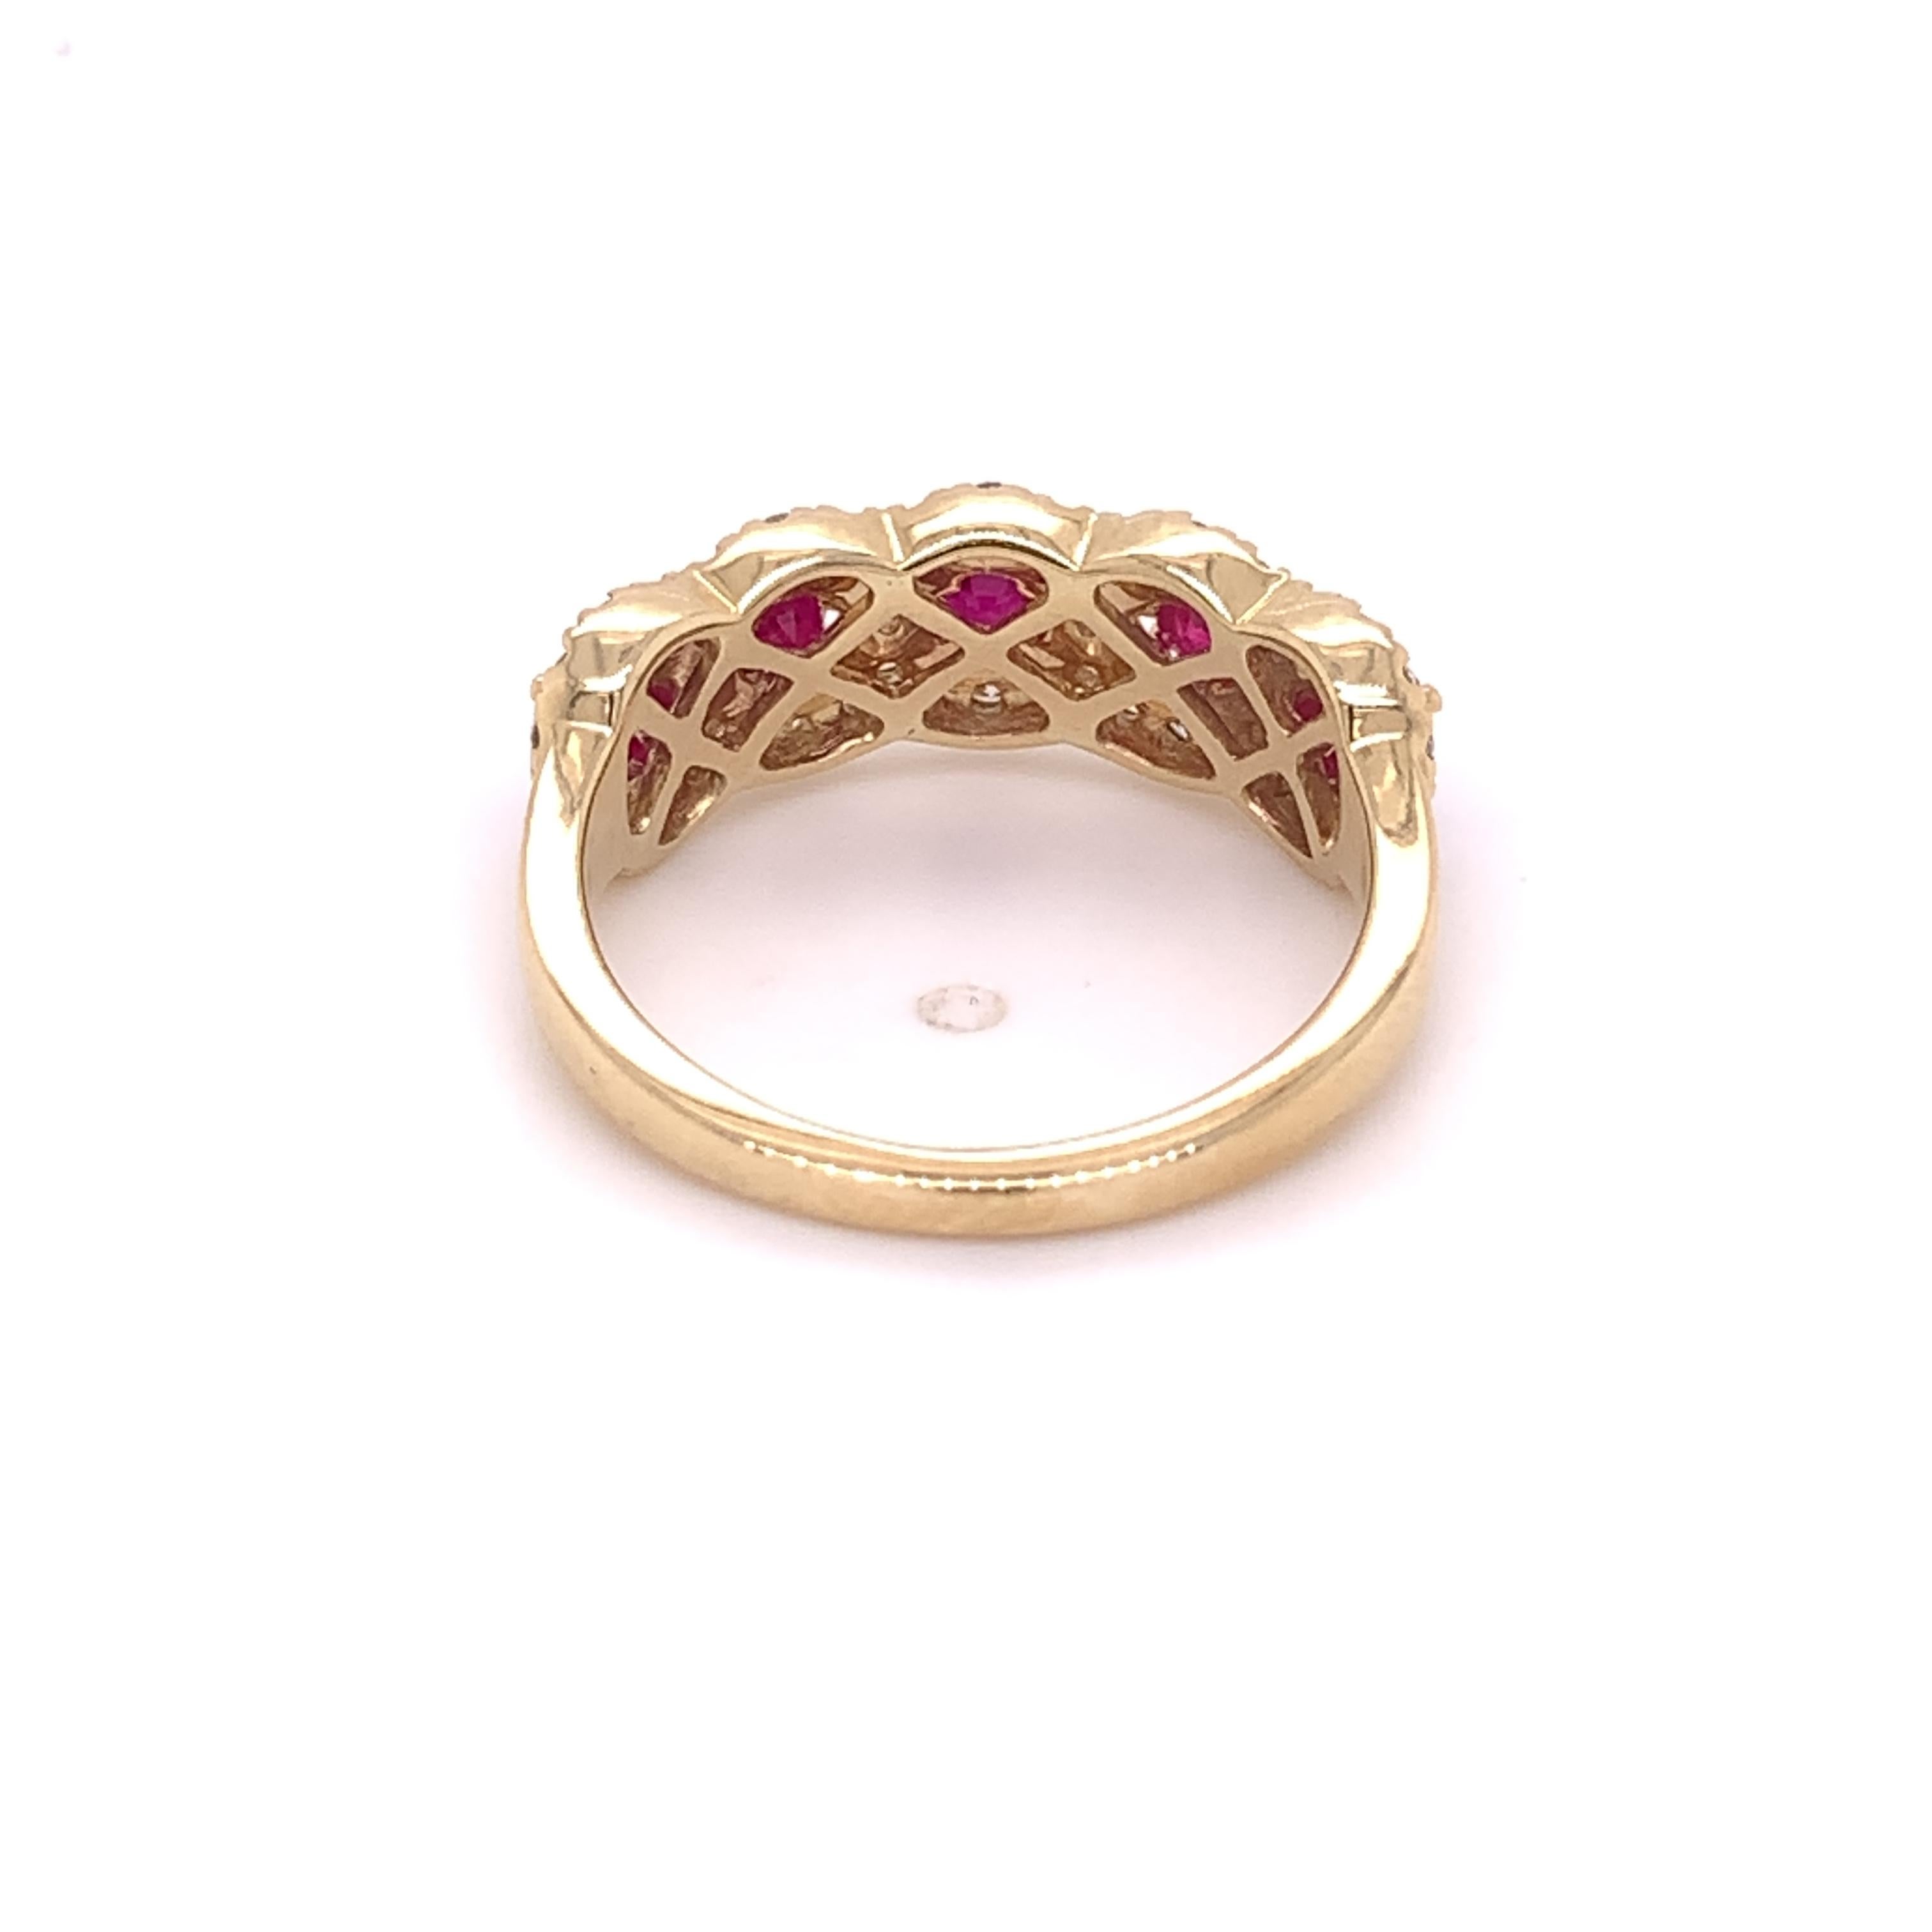 A stunning cocktail ring crafted in 14 karat yellow gold with 5 round natural ruby stones, 0.135 carats each totaling approximately 0.67 carats. The measurements for these stones are 2.90 - 2.90 x 1.74mm. This ring also contains 48 natural round